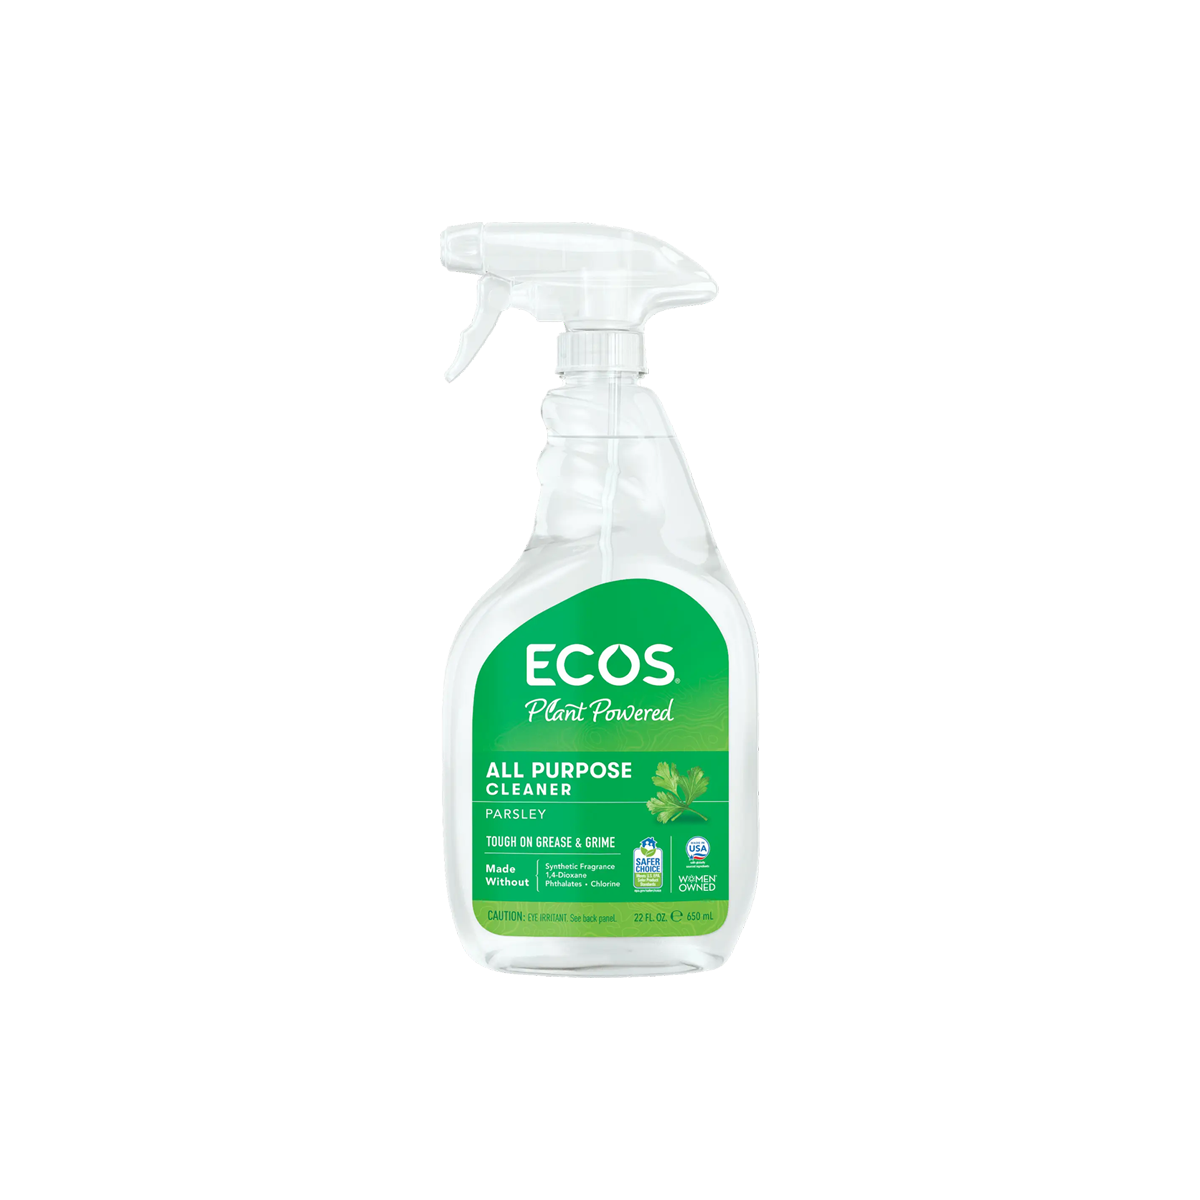 ECOS All Purpose Cleaner bottle